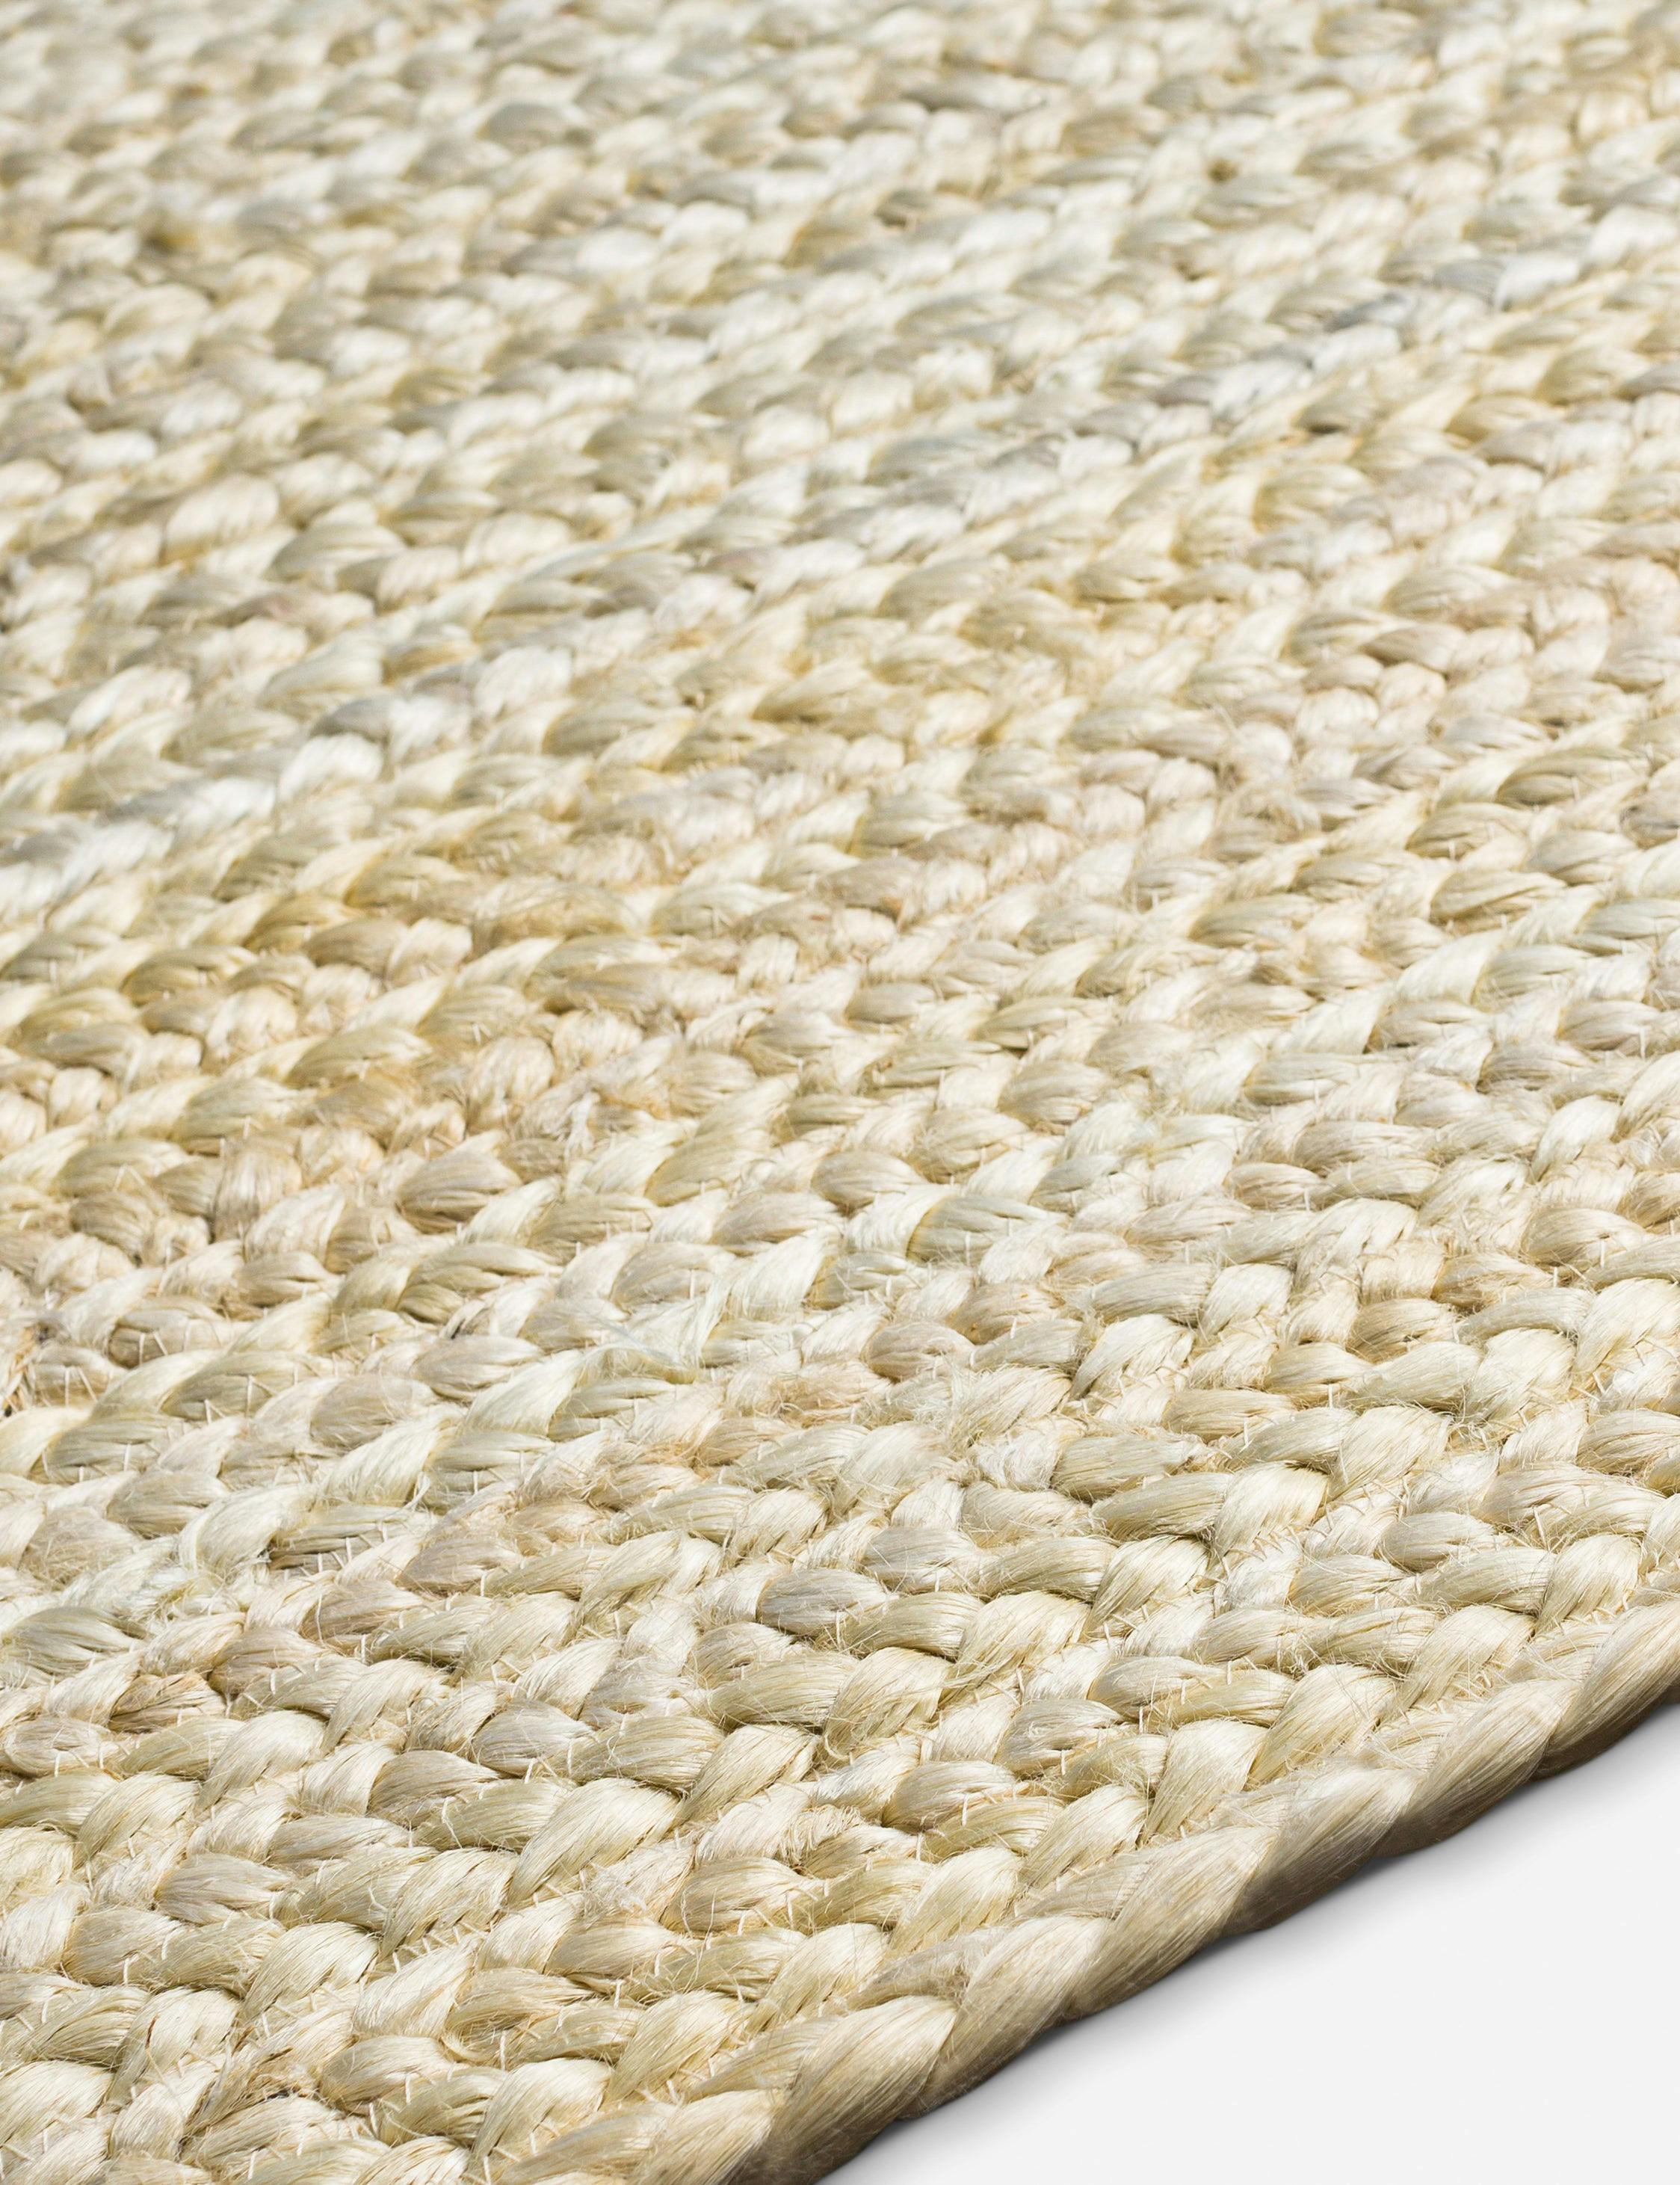 Ivory Handwoven Braided Jute Rug 6' x 9' - Easy Care and Washable